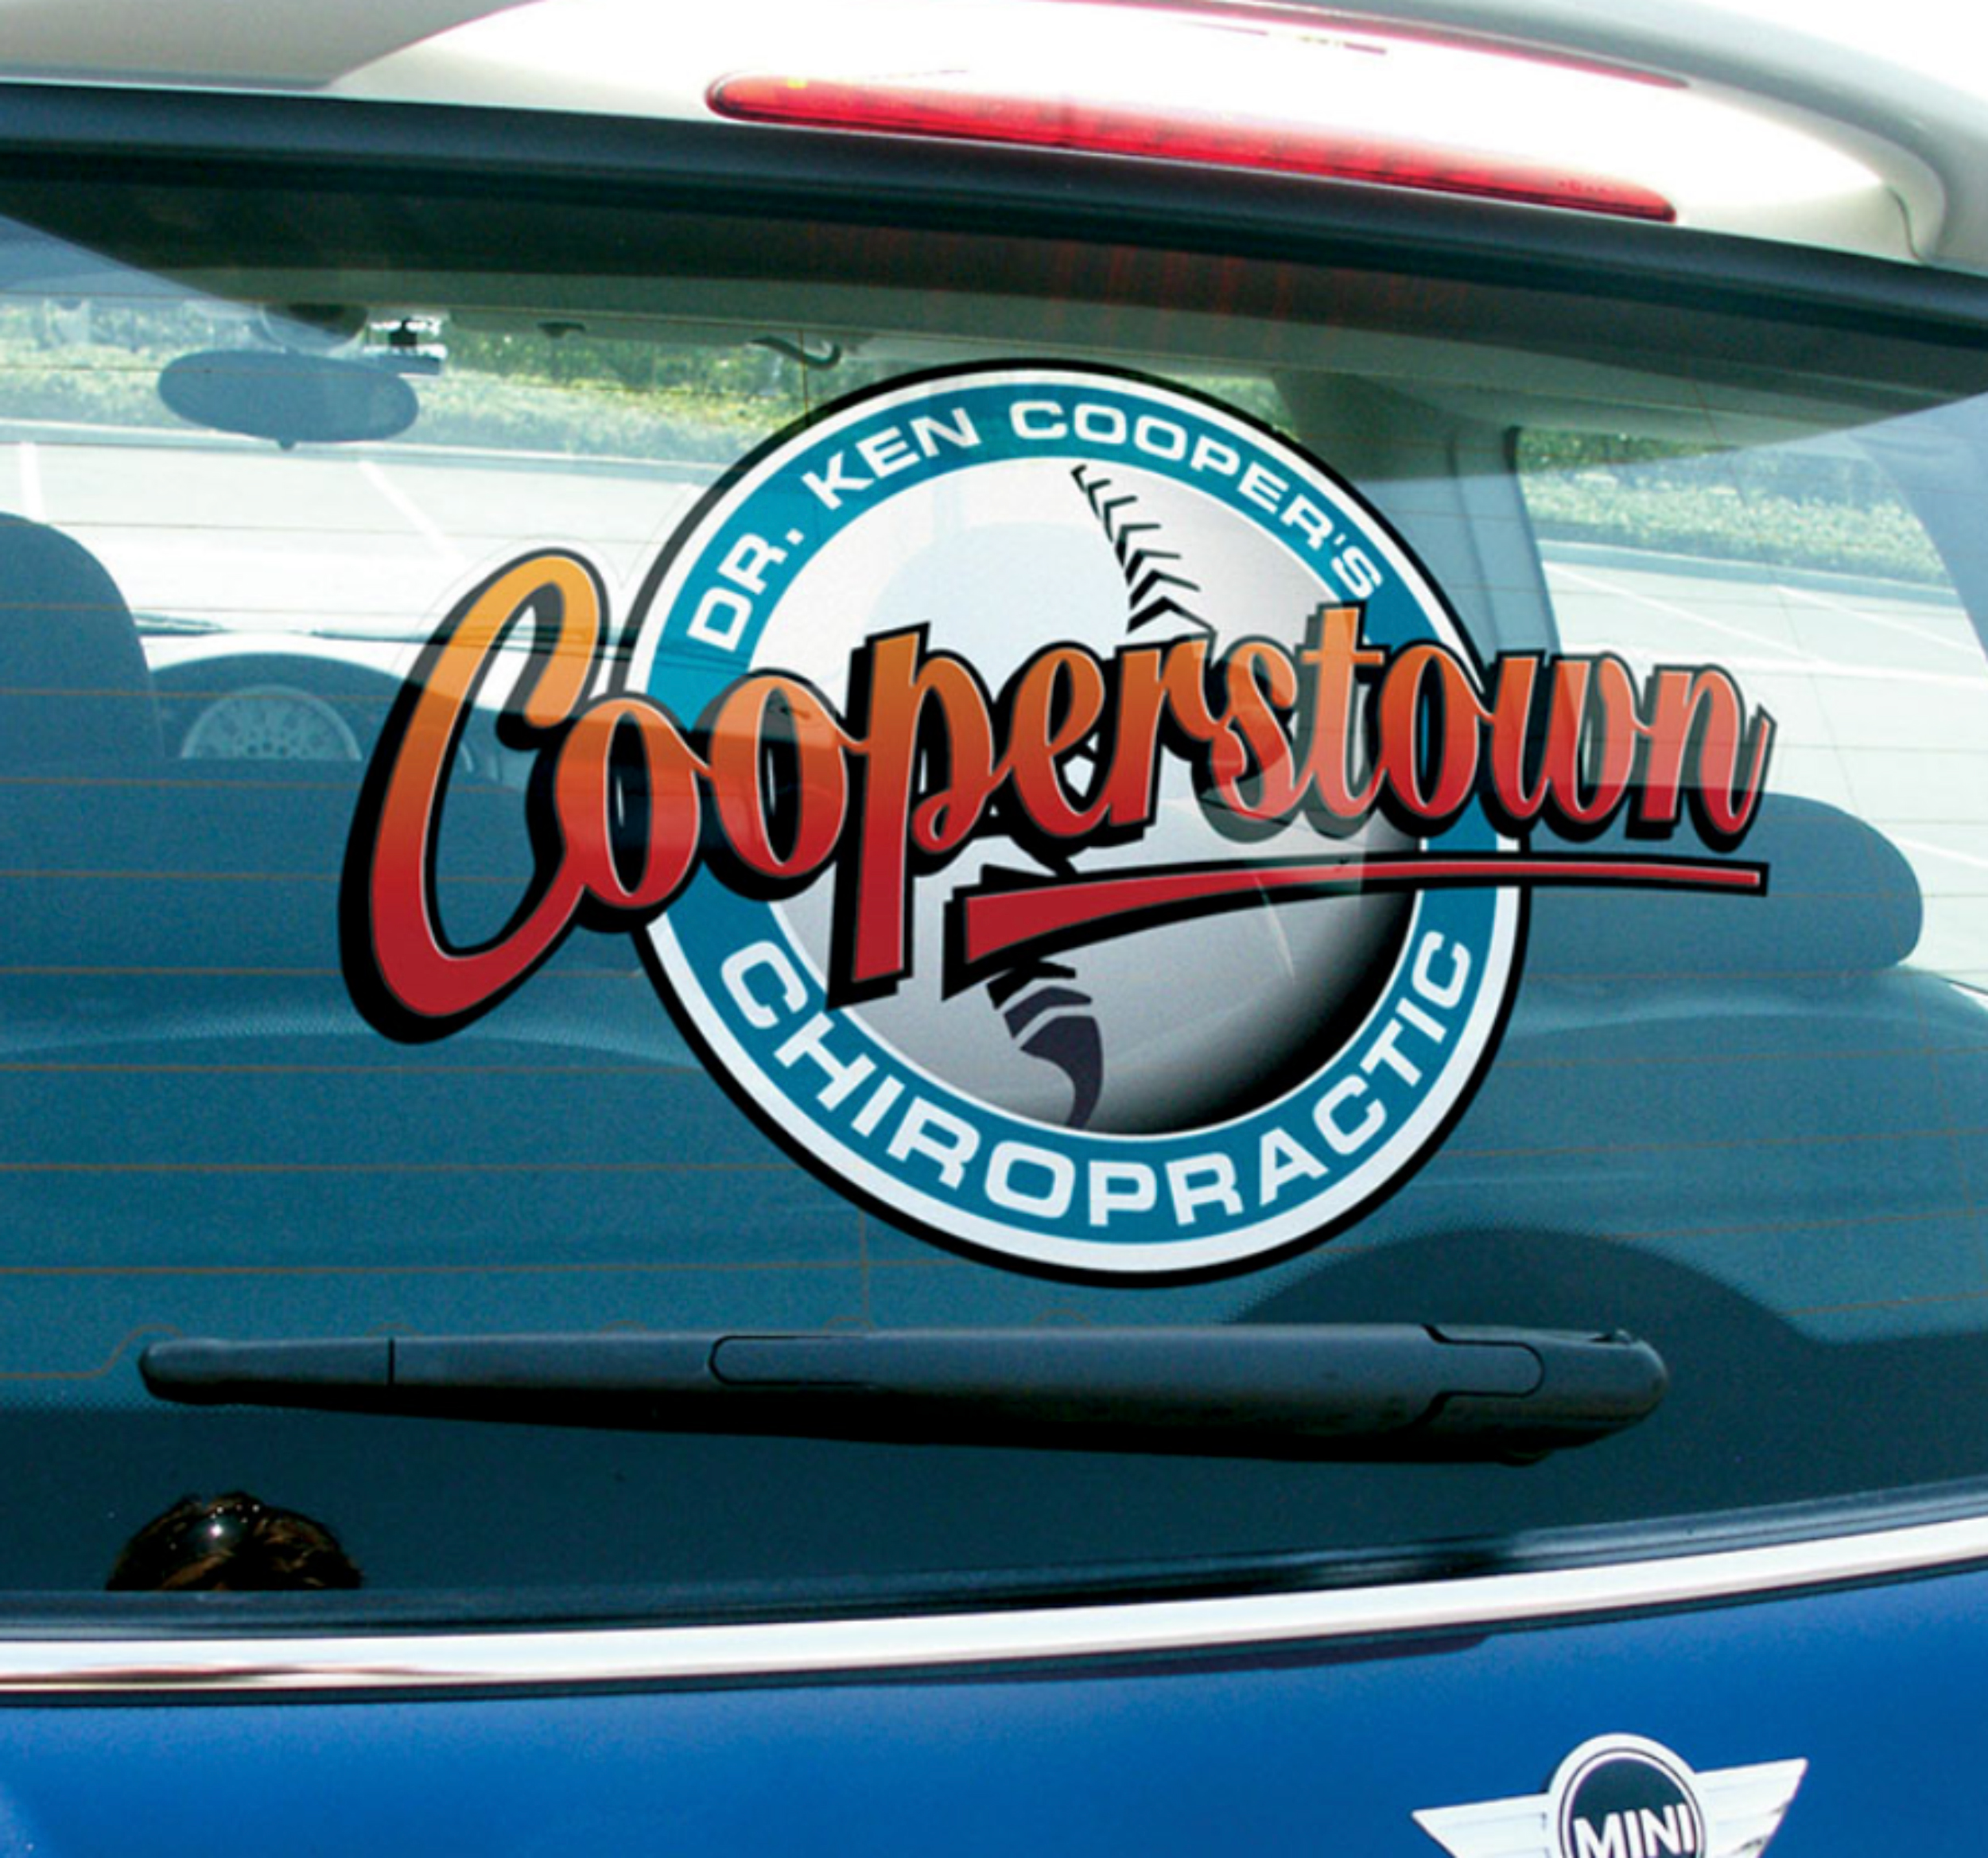 Full-color window decals such as the one shown below are well within the range of a startup signshop.